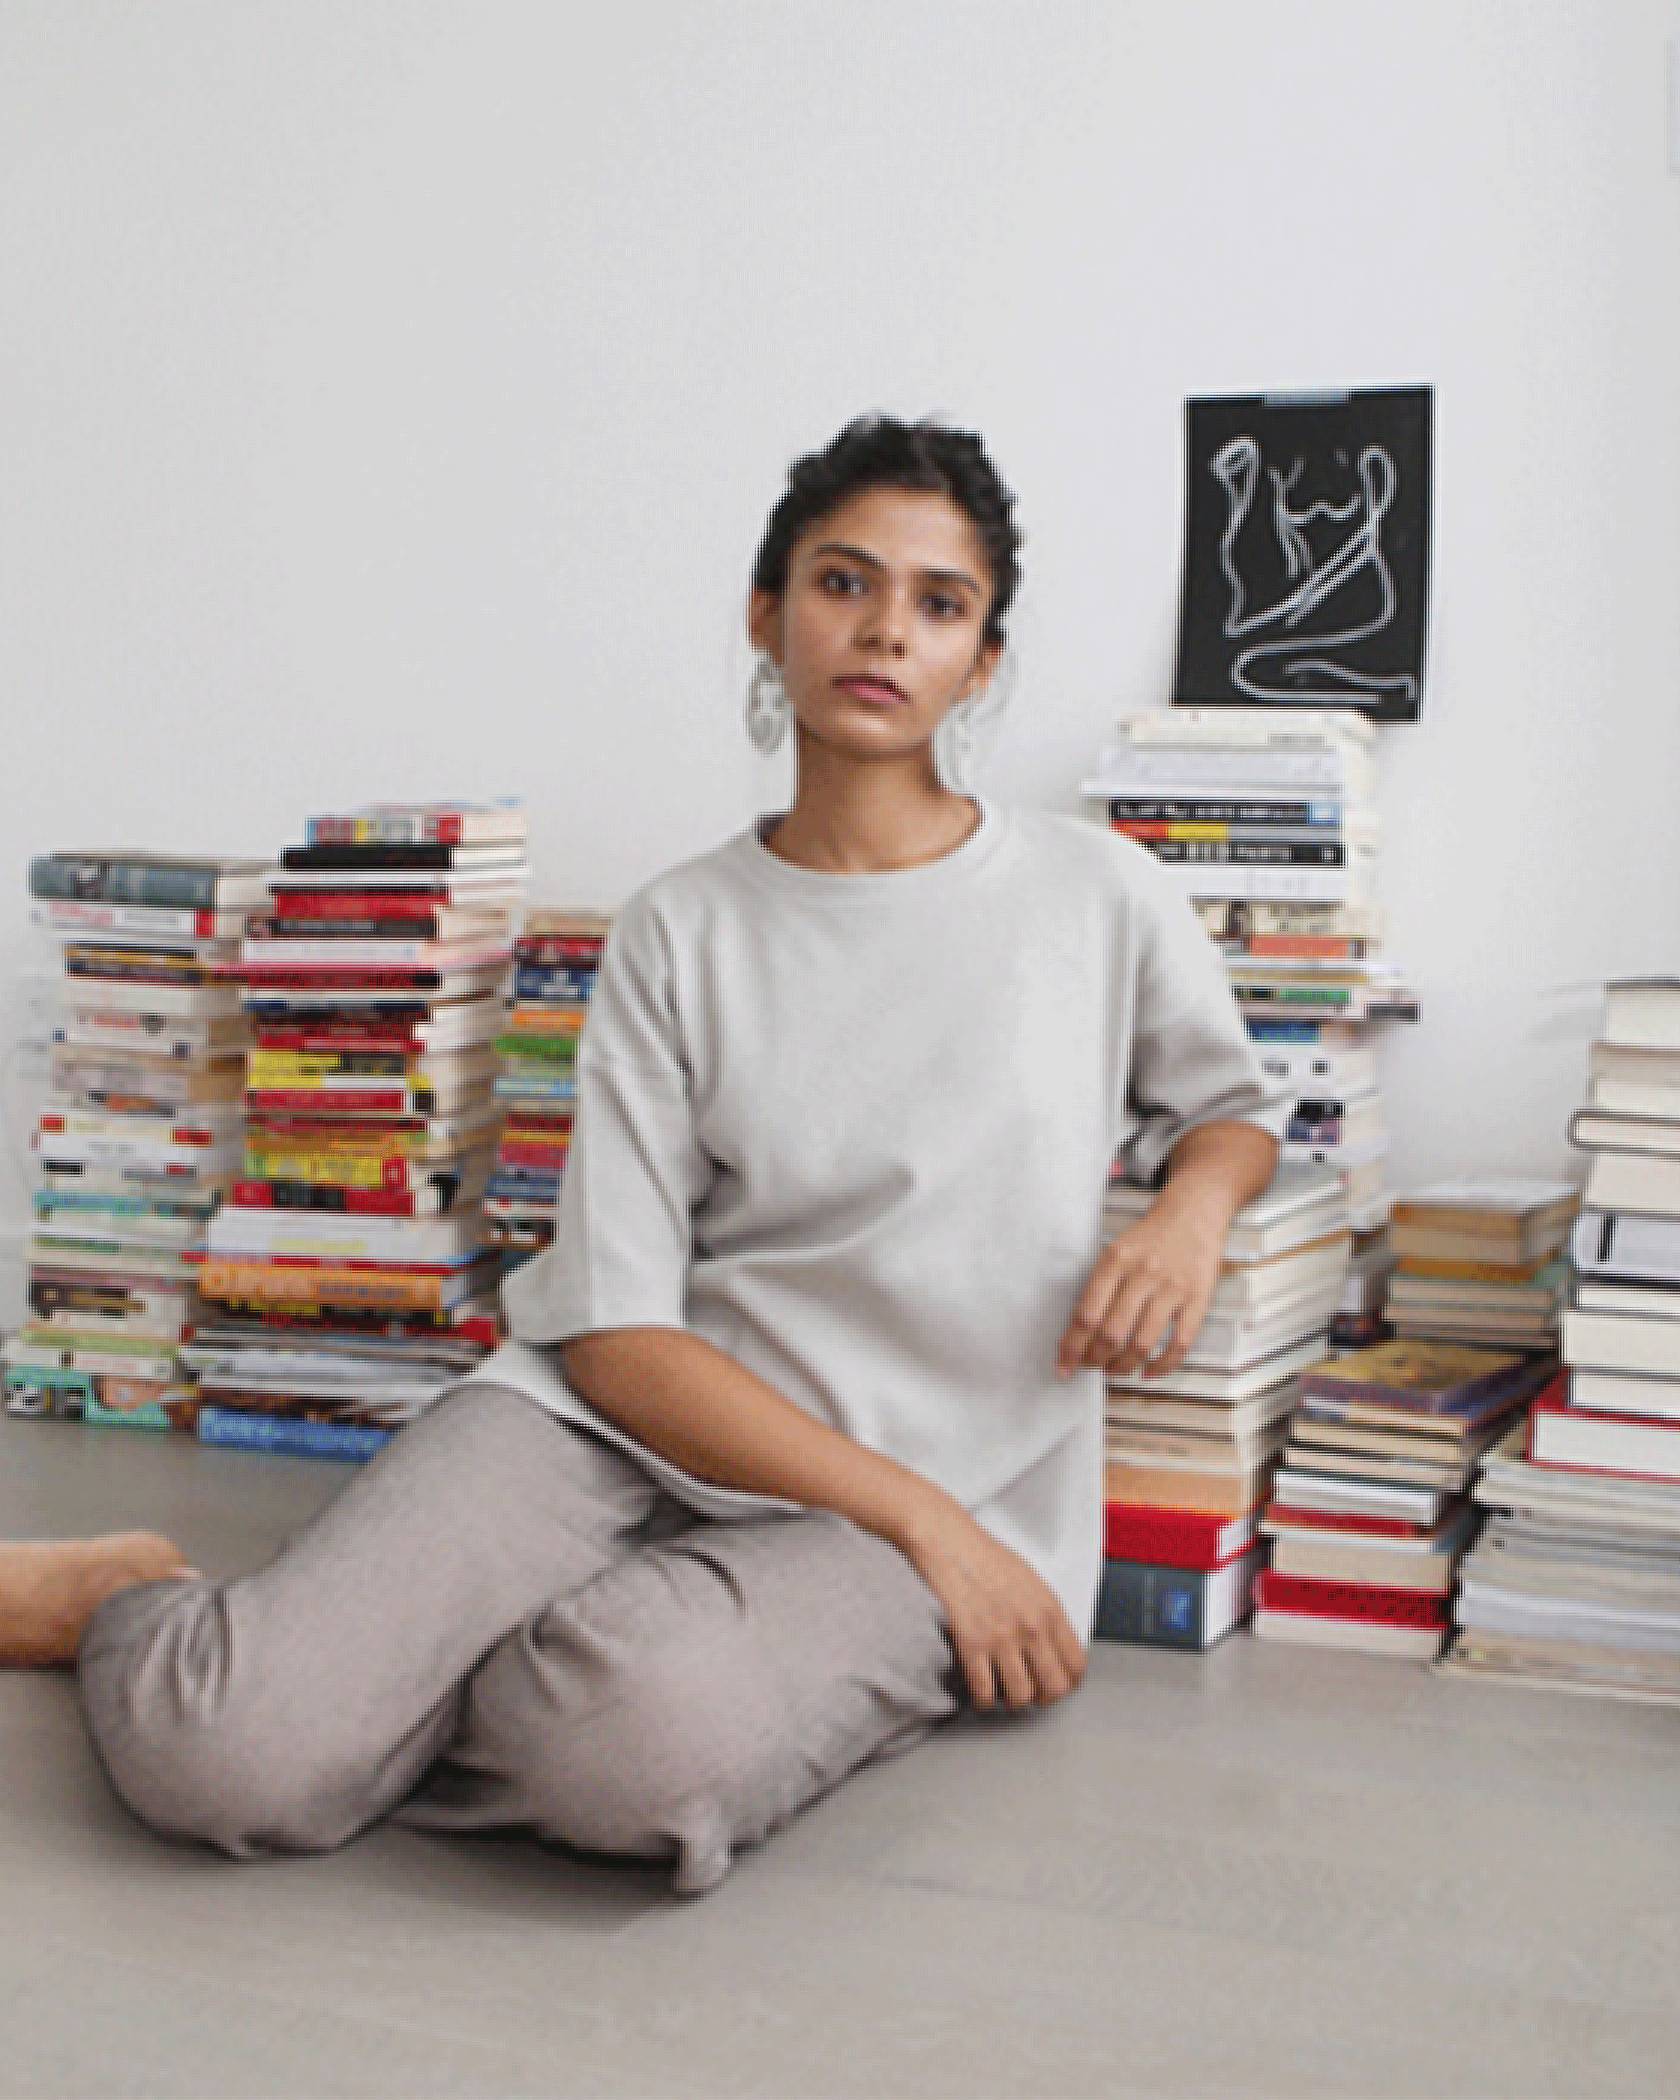 Image of Tasnim Ahmed sitting on the floor with stacks of books behind her.